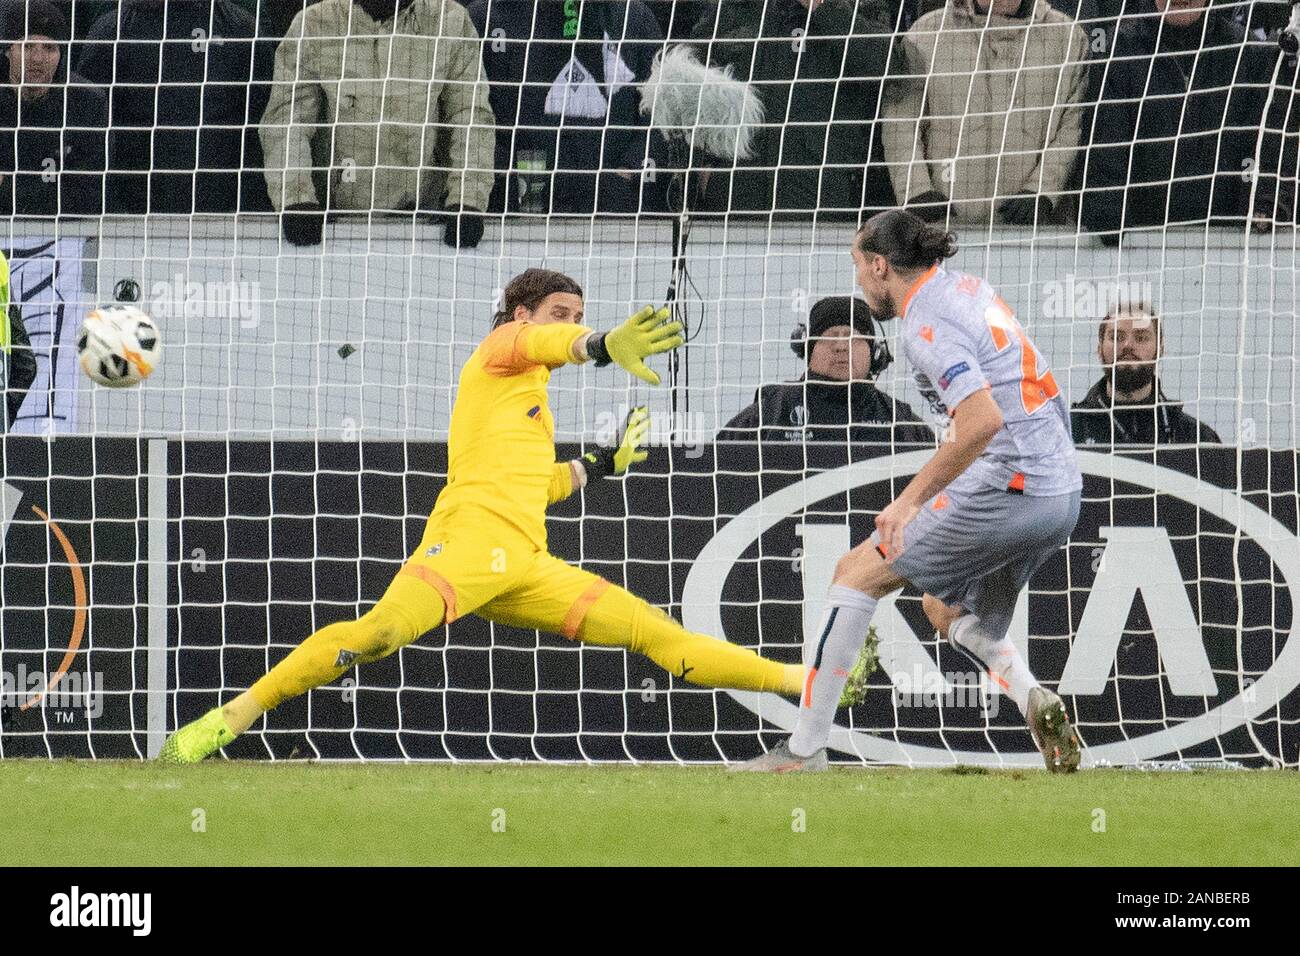 Enzo CRIVELLI (Basak, r.) Scores the decisive goal for the 2-1 versus goalwart Yann SOMMER (MG) shortly before the end of the game; Soccer Europa League, group stage, group J, matchday 6, Borussia Monchengladbach (MG) - Istanbul Basaksehir FK (Basak) 1: 2, on 12.12.2019 in Borussia Monchengladbach/Germany. | usage worldwide Stock Photo